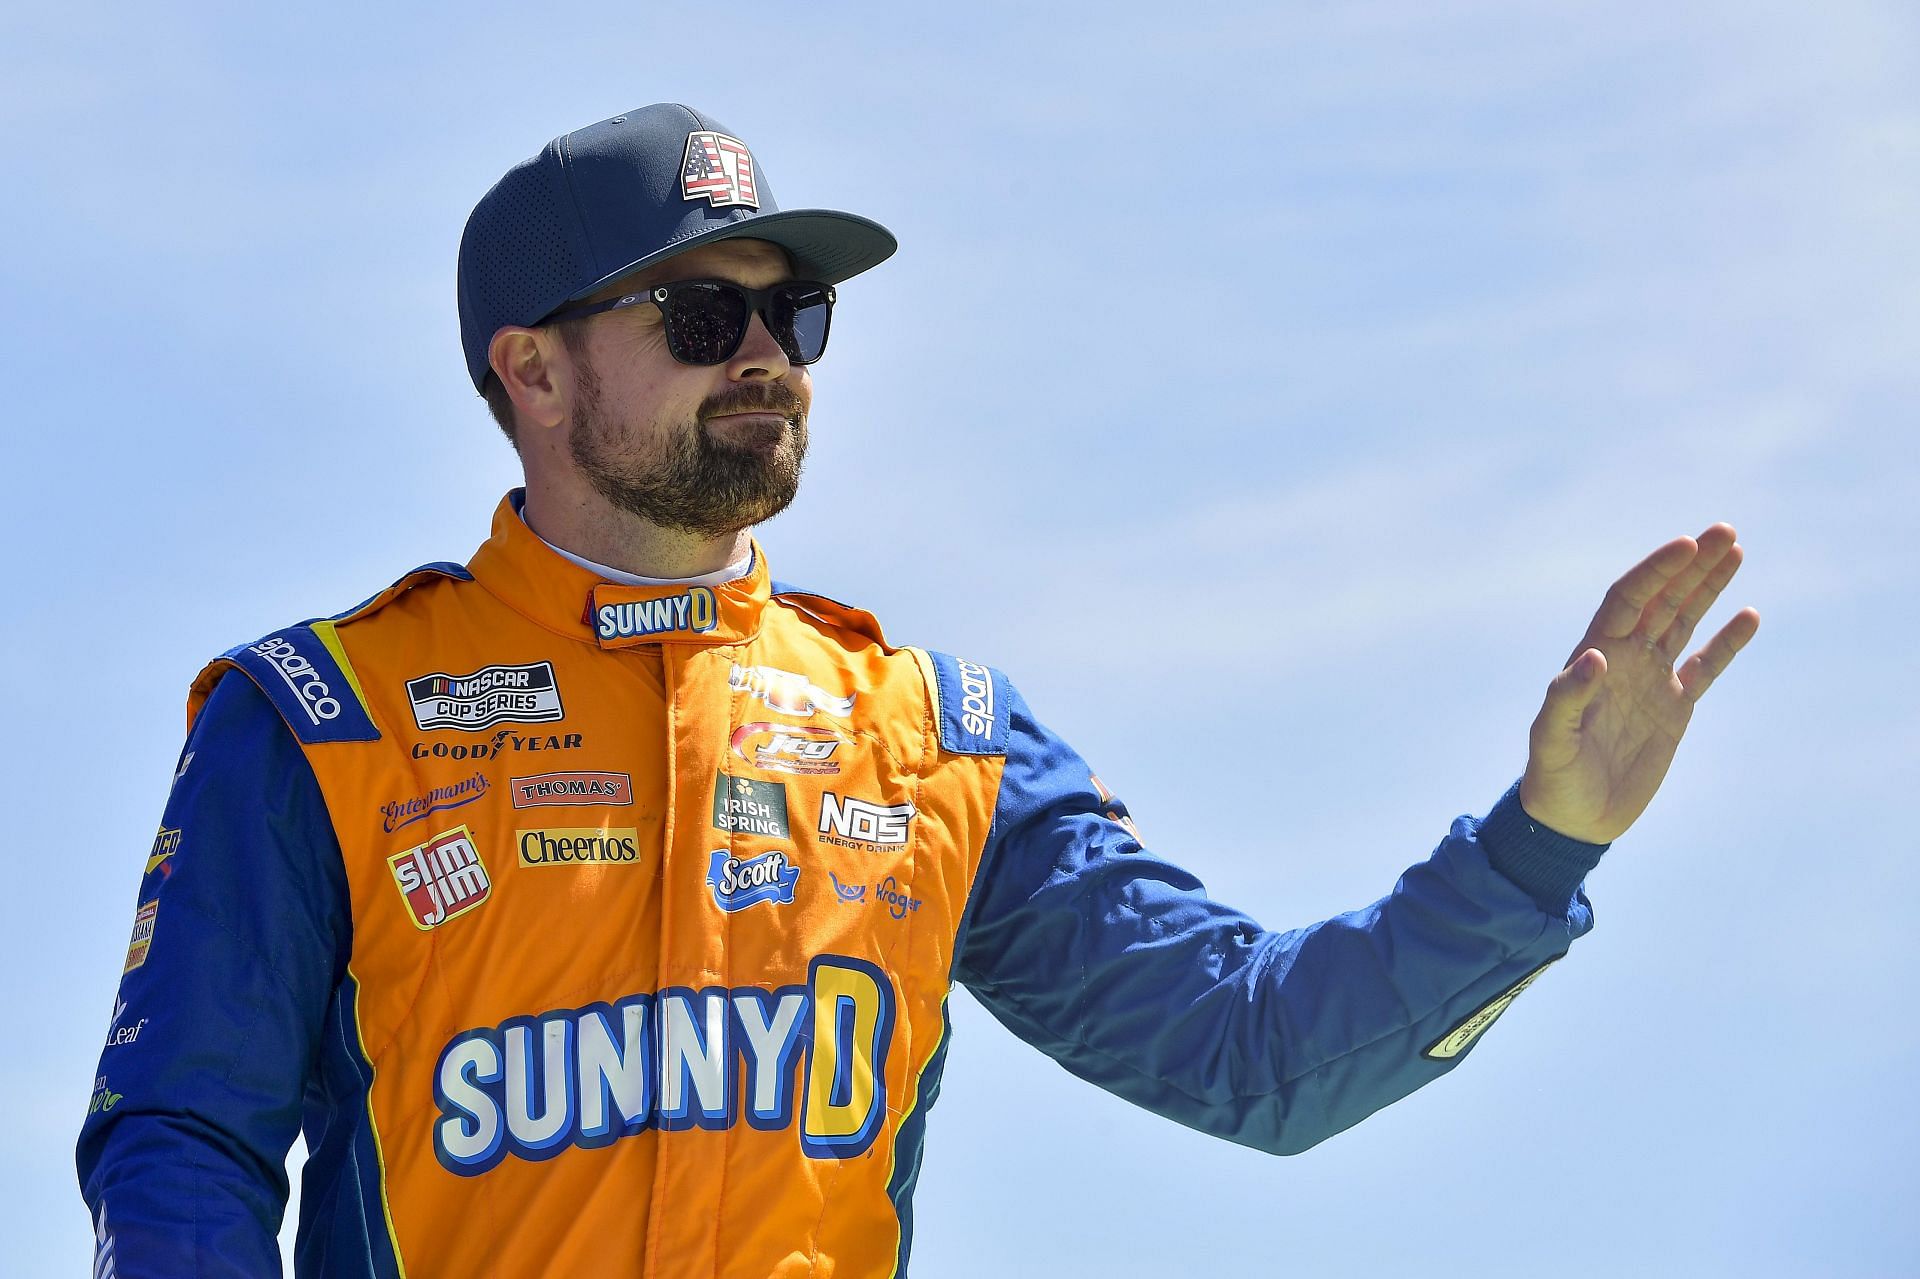 Ricky Stenhouse Jr. during driver intros before the 2022 NASCAR Cup Series Echopark Automotive Grand Prix at the Circuit of The Americas in Austin, Texas. (Photo by Logan Riely/Getty Images)